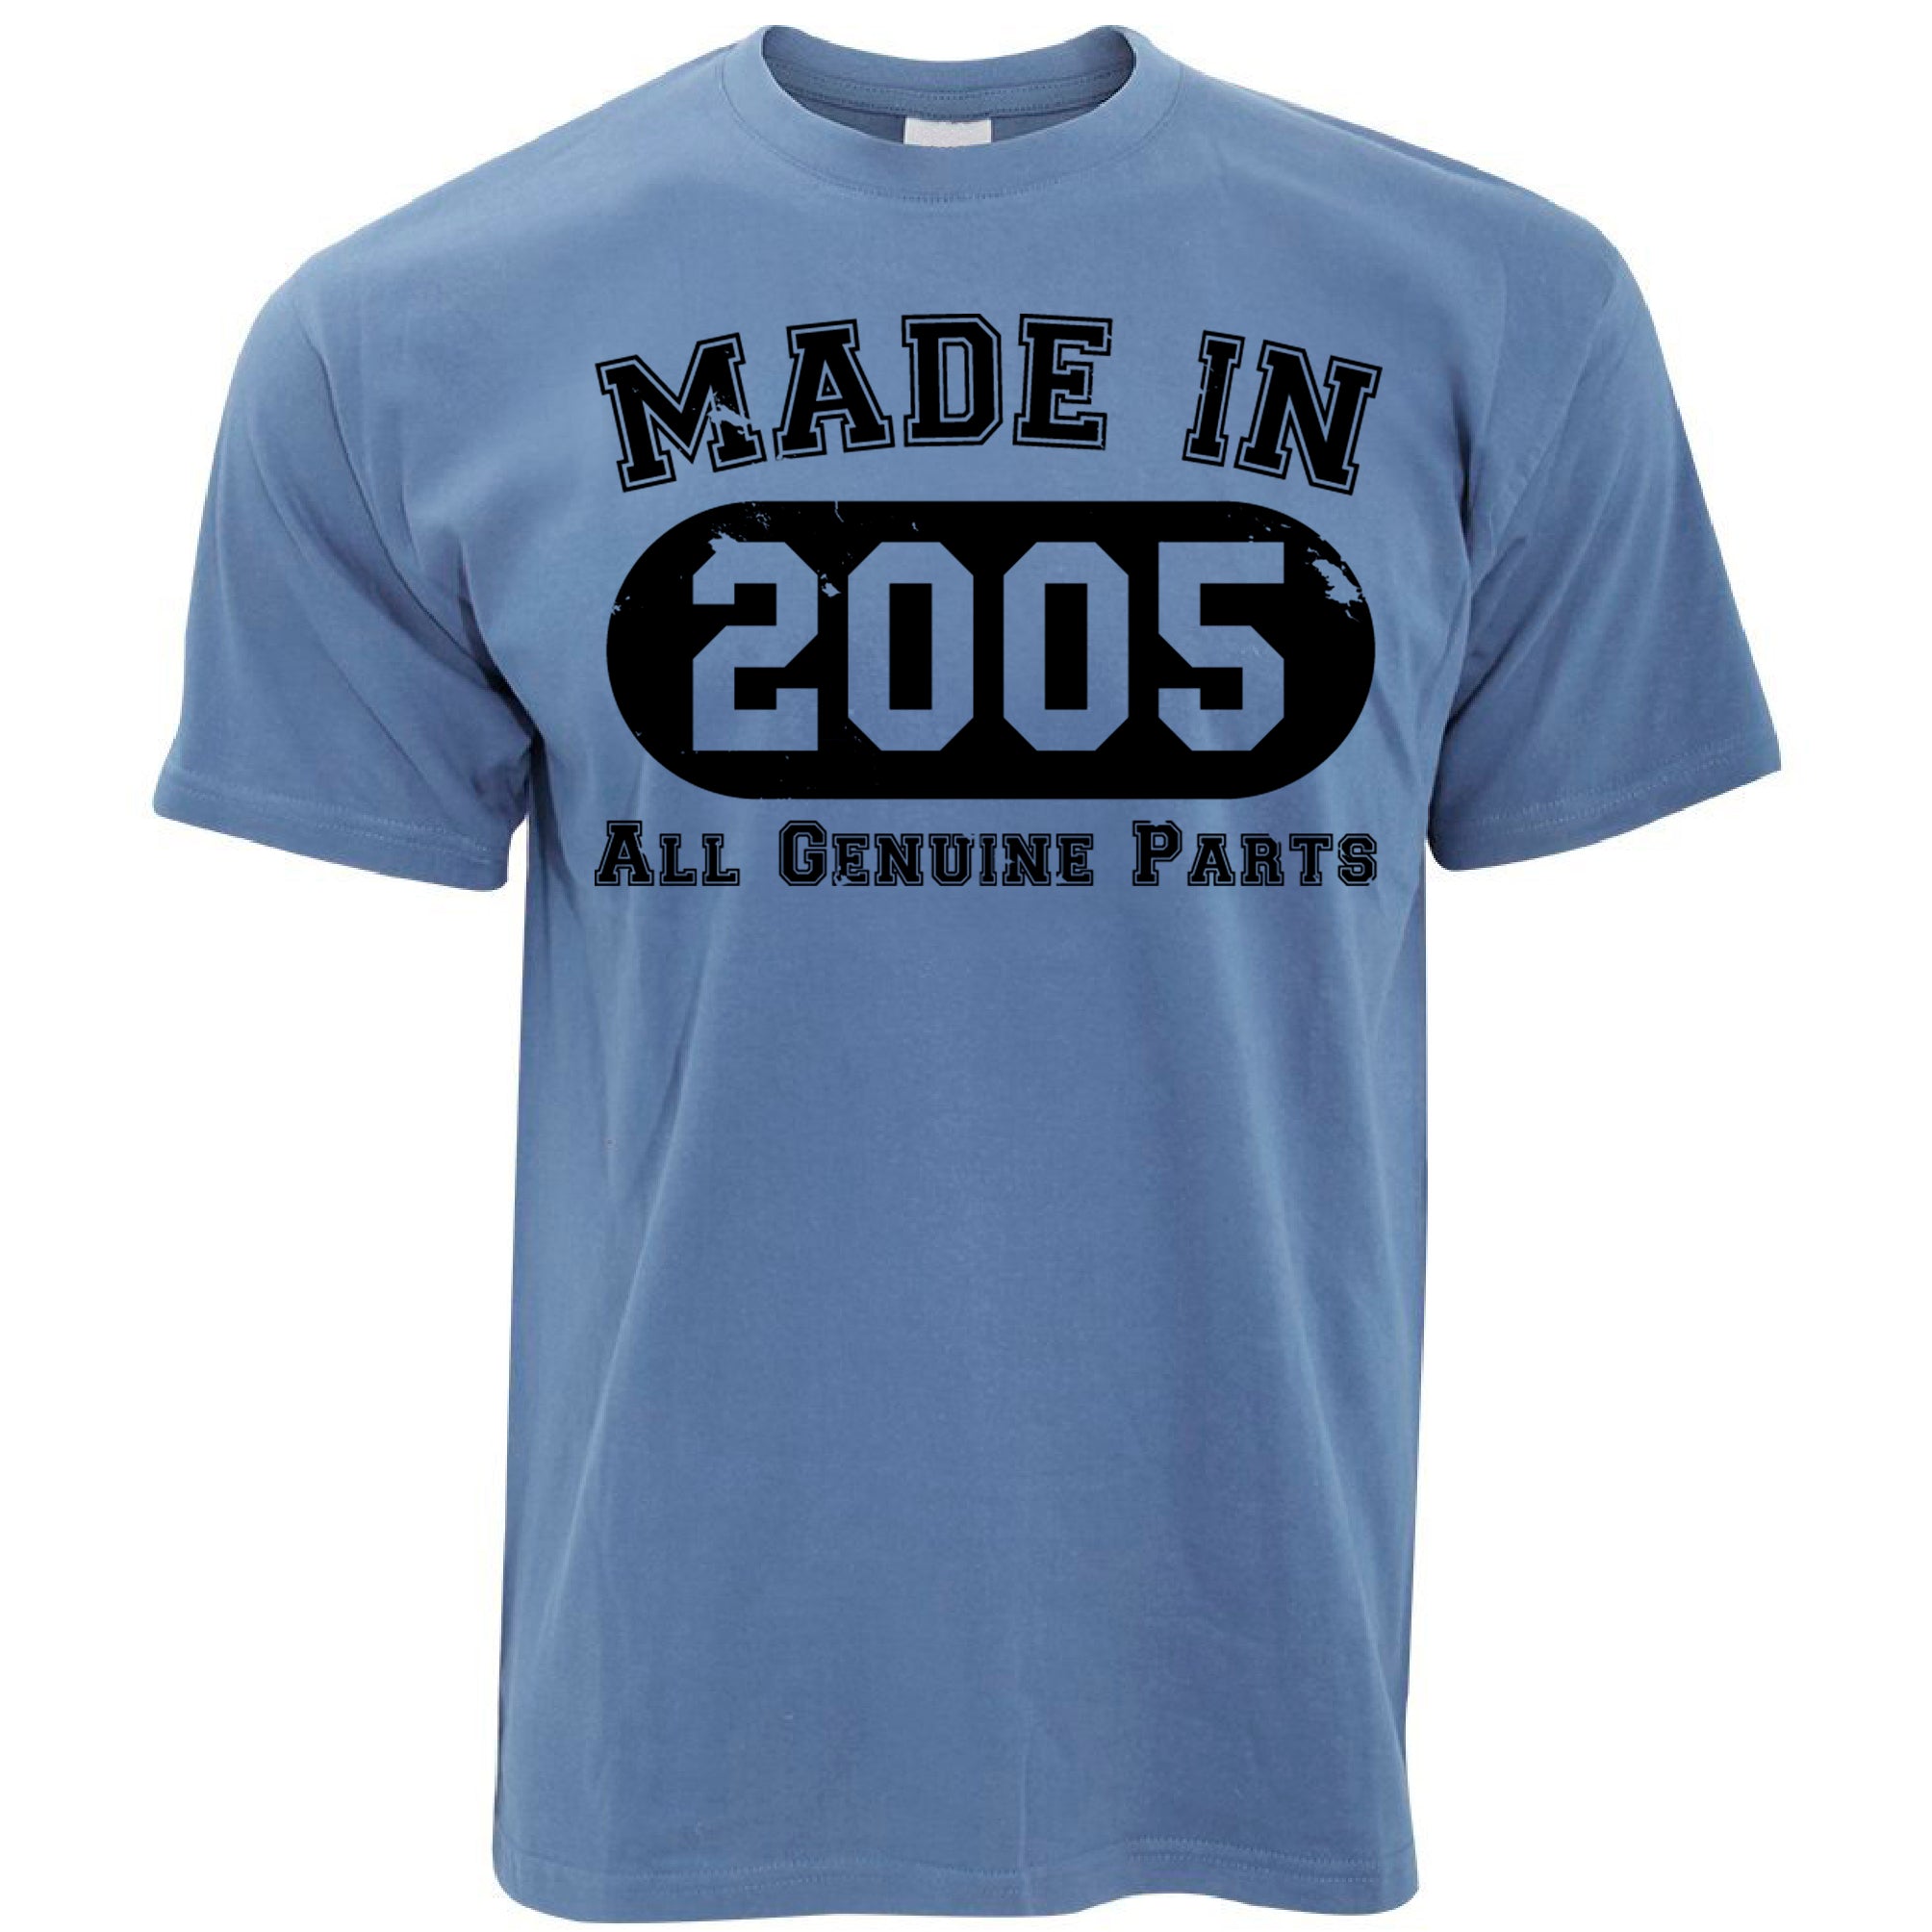 18th Birthday T Shirt Made in 2005 - All Genuine Parts